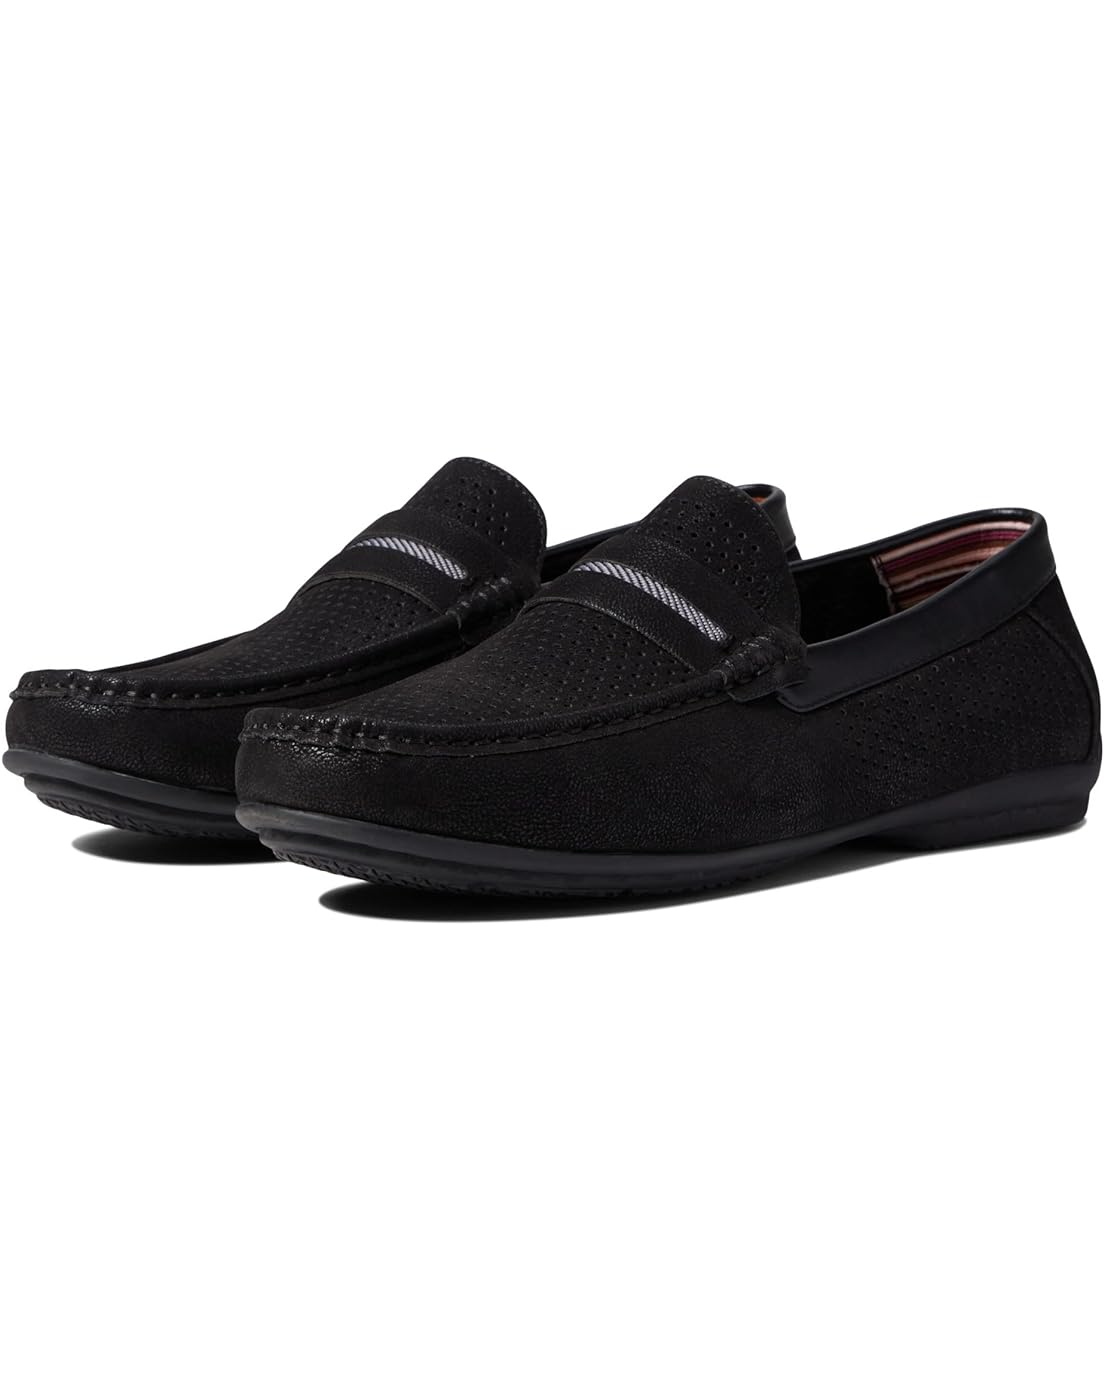 Stacy Adams Corby Slip-On Loafer